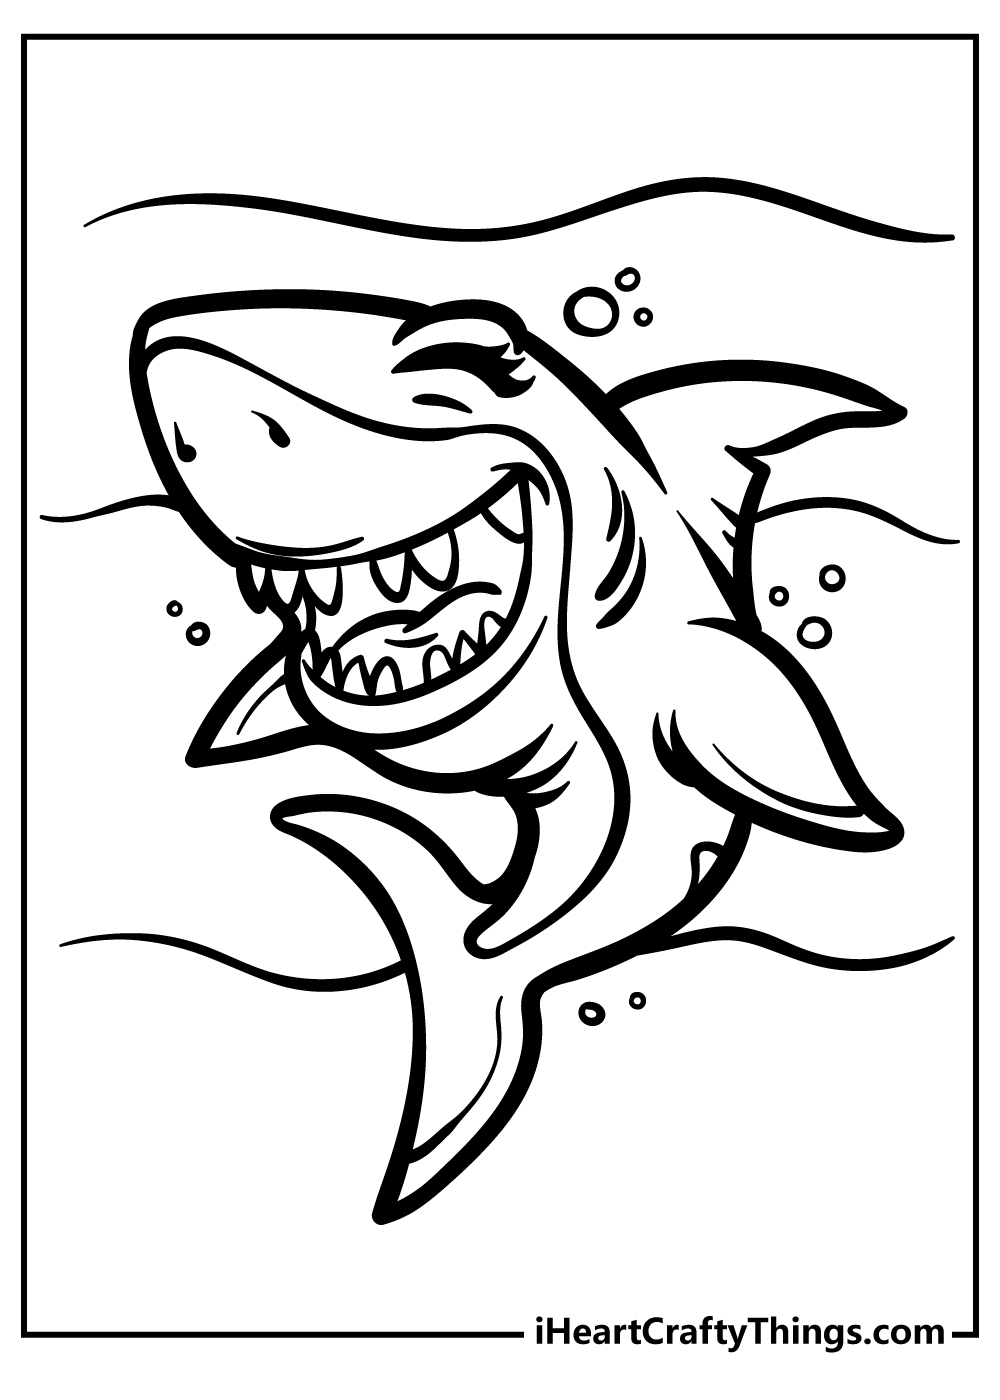 Shark coloring pages free printables